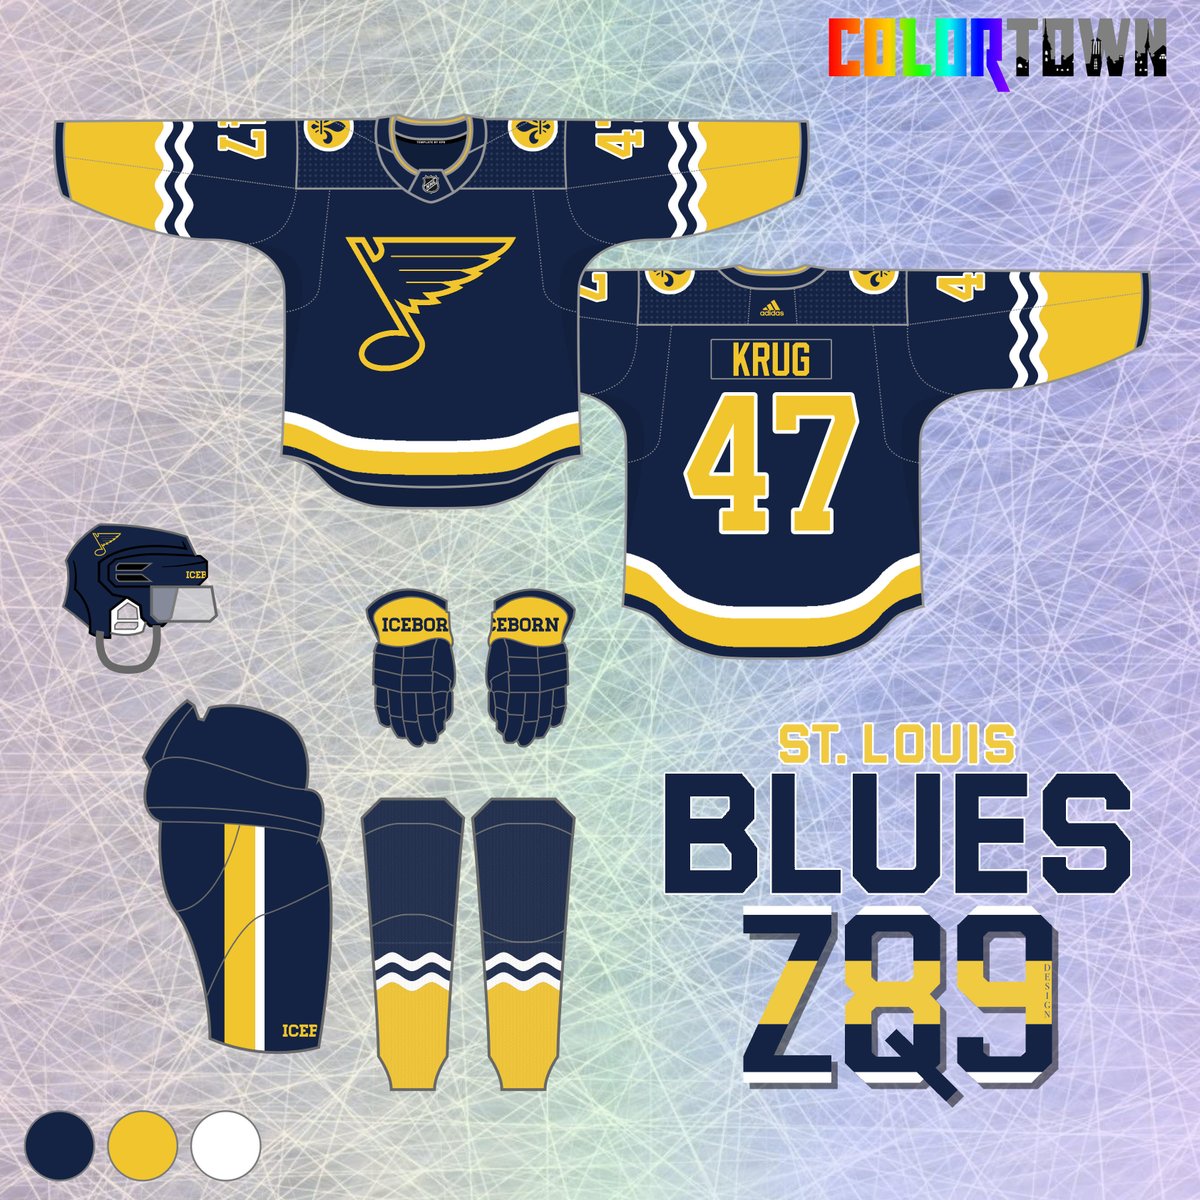 The #stlblues are up next in my NHL #ColorTown series! Navy is used as the primary, since I haven't used it yet for the Blues, and elements of the St. Louis flag are used on the arms and shoulder patches for the 'Town' theme. I think it rounds out my Blues concepts nicely! (2/40)